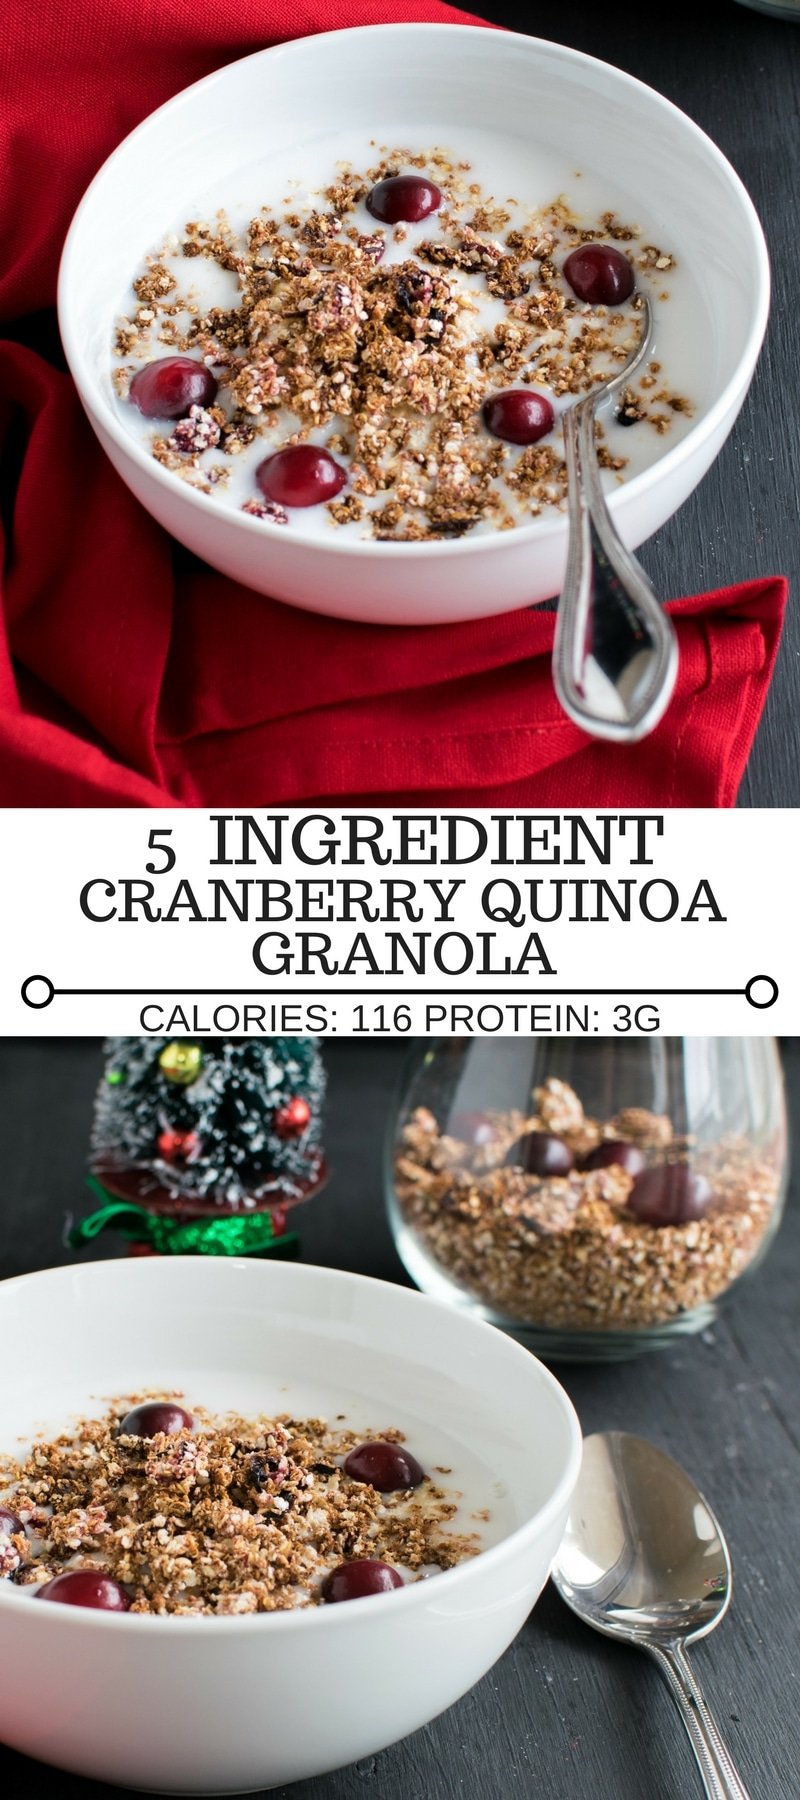 5 Ingredient Cranberry Quinoa Granola made out of fresh cranberries is PCOS friendly recipe. This granola is also vegan and gluten free. It is very rich in fiber and high on antioxidants. Also, this granola has the required amount of protein. Overall, it is a complete morning meal when combined with your favorite milk. | kiipfit.com